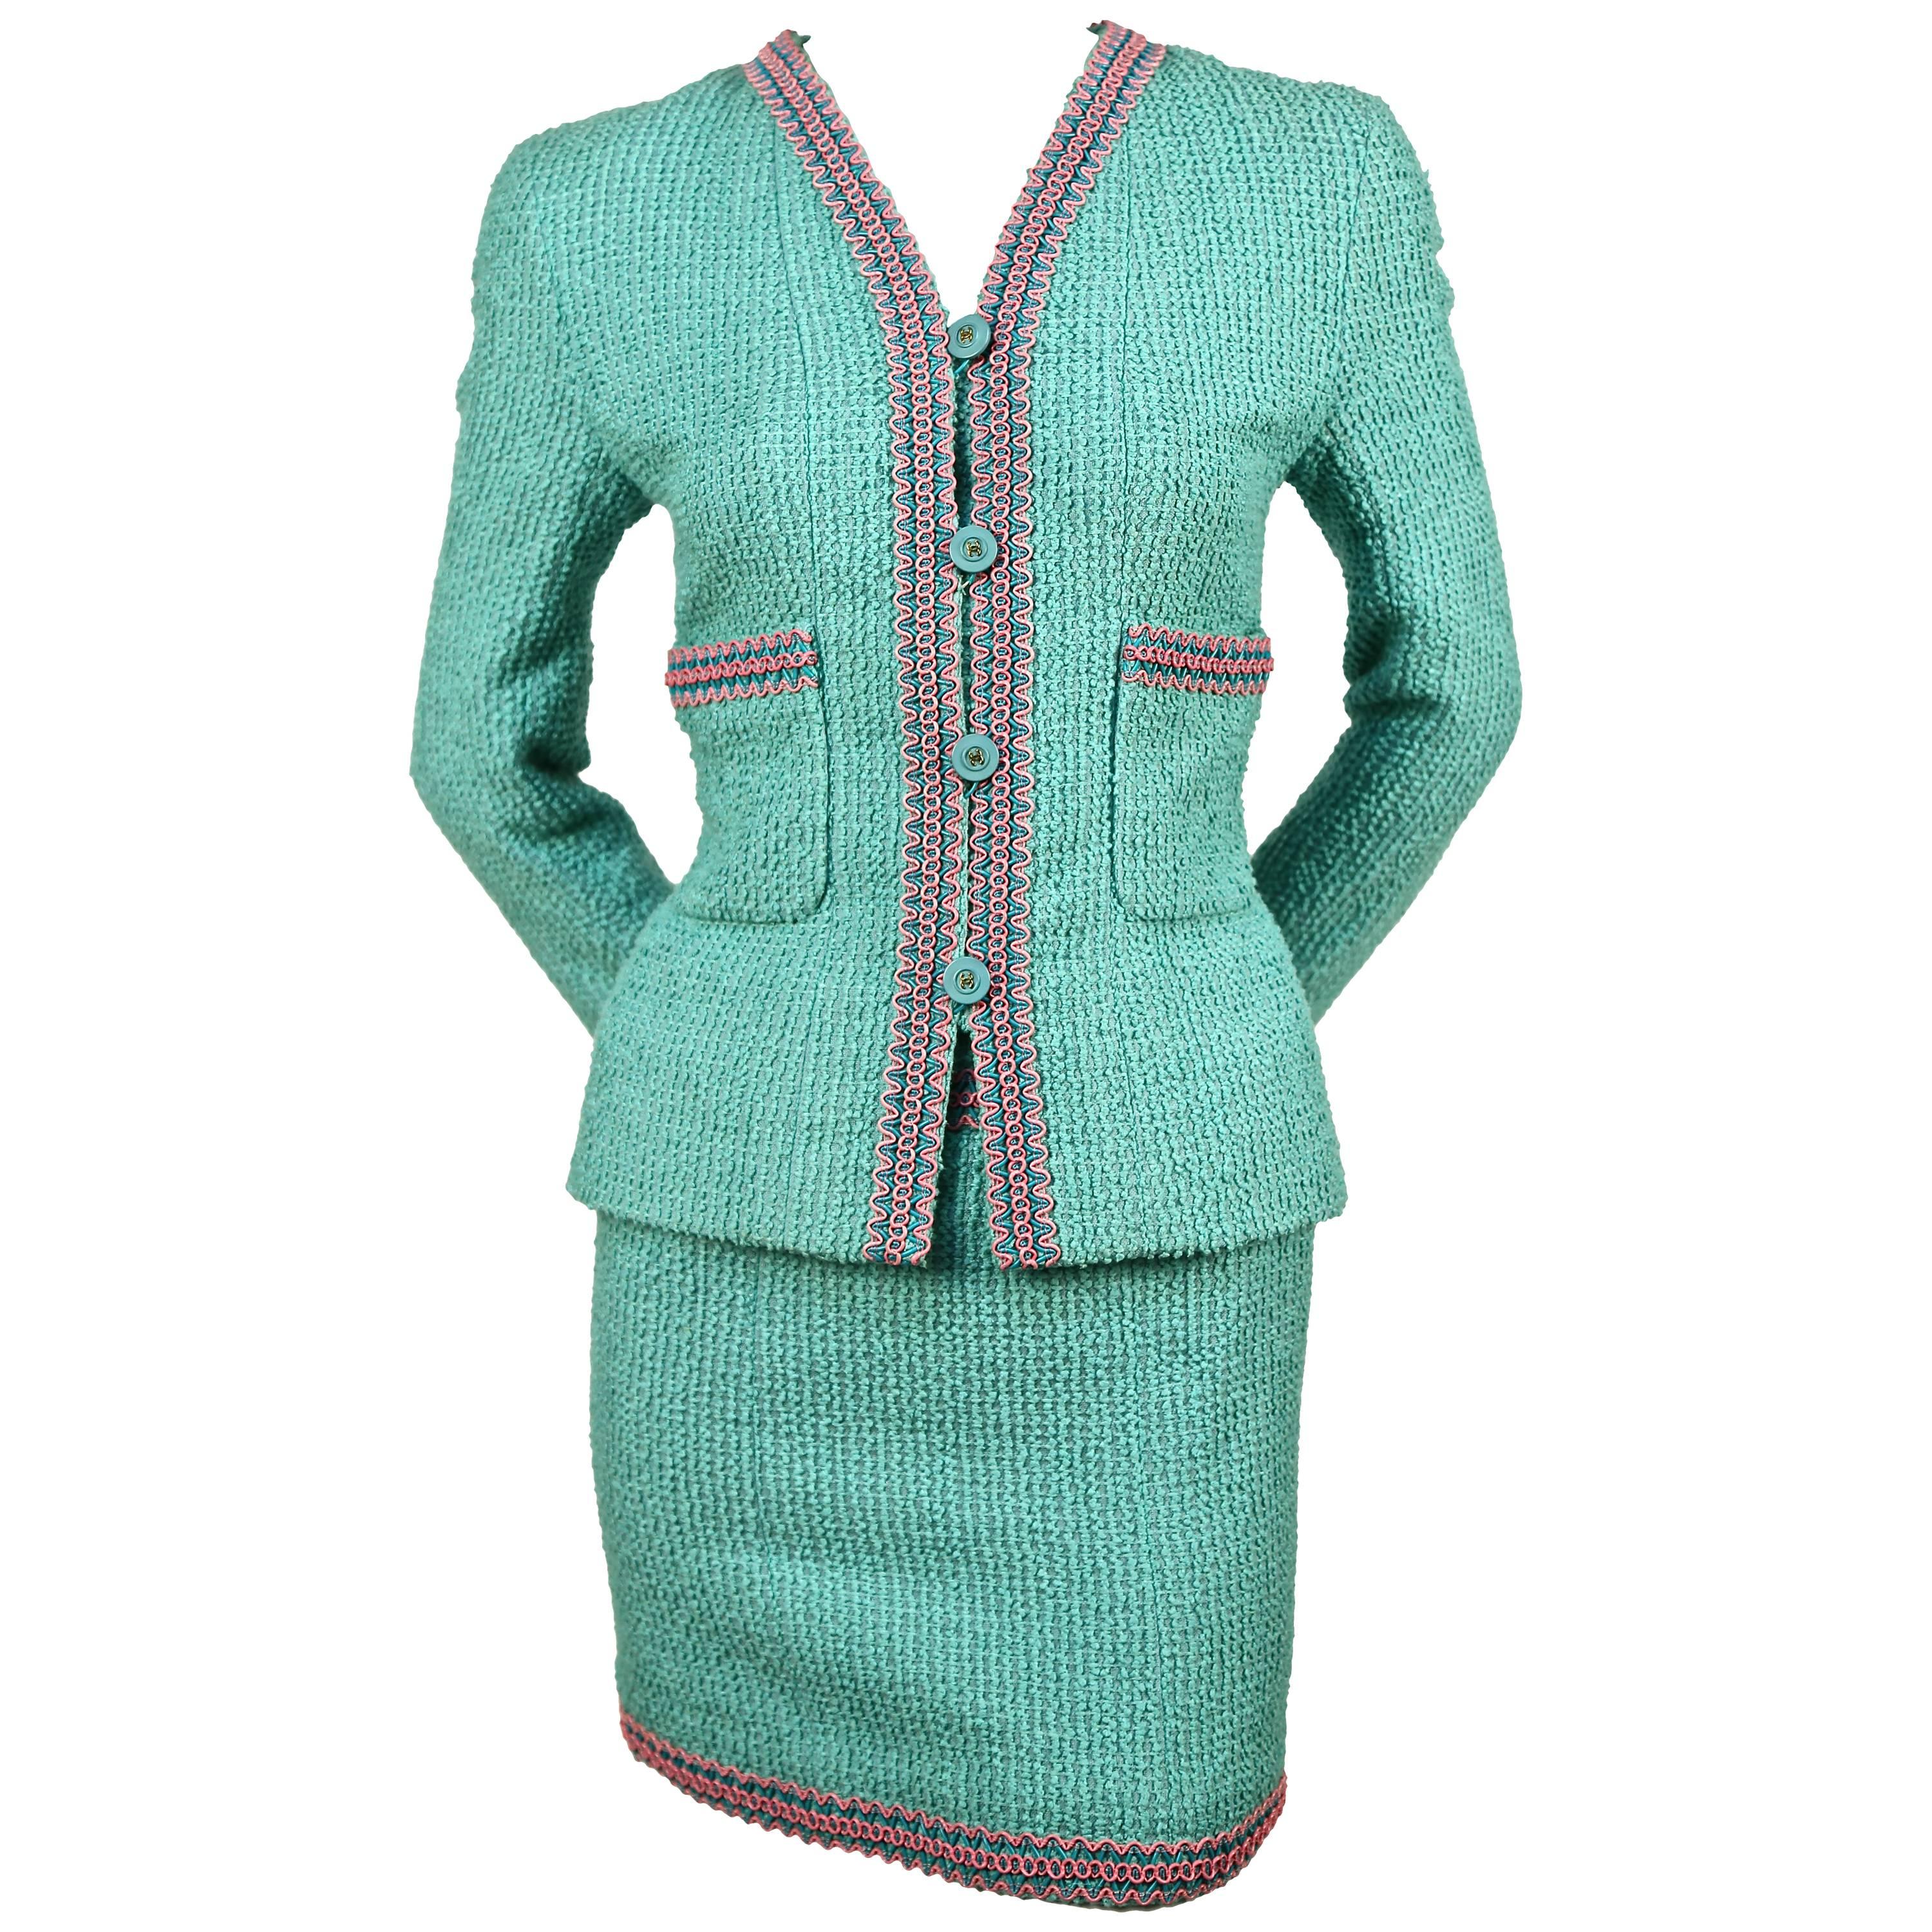 1994 CHANEL turquoise boucle runway 'Scoubidou' suit with braided trim